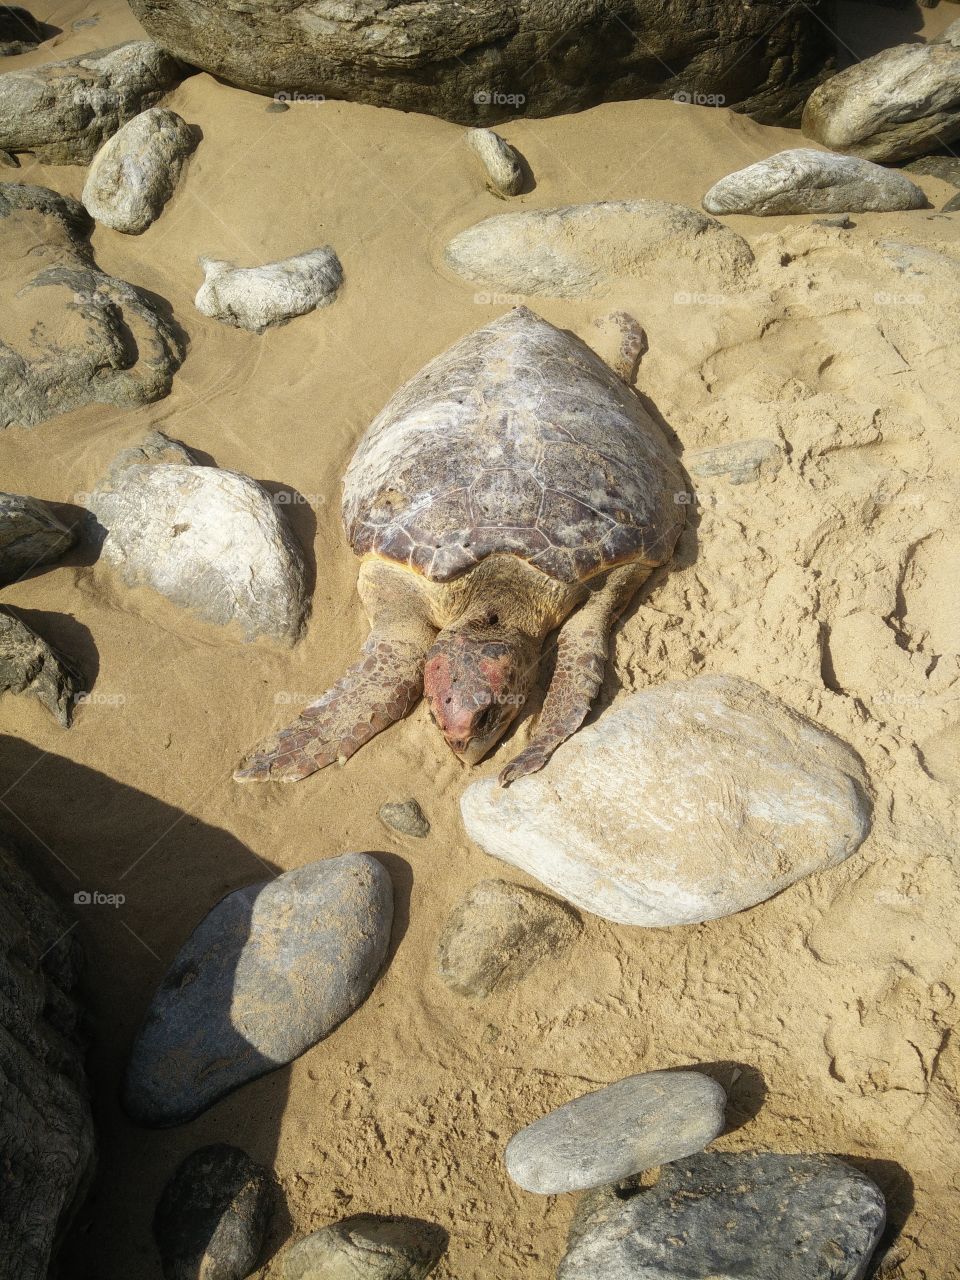 The dead green sea turtle from global pollution lies on the shore among the stones.  Environmental pollution.